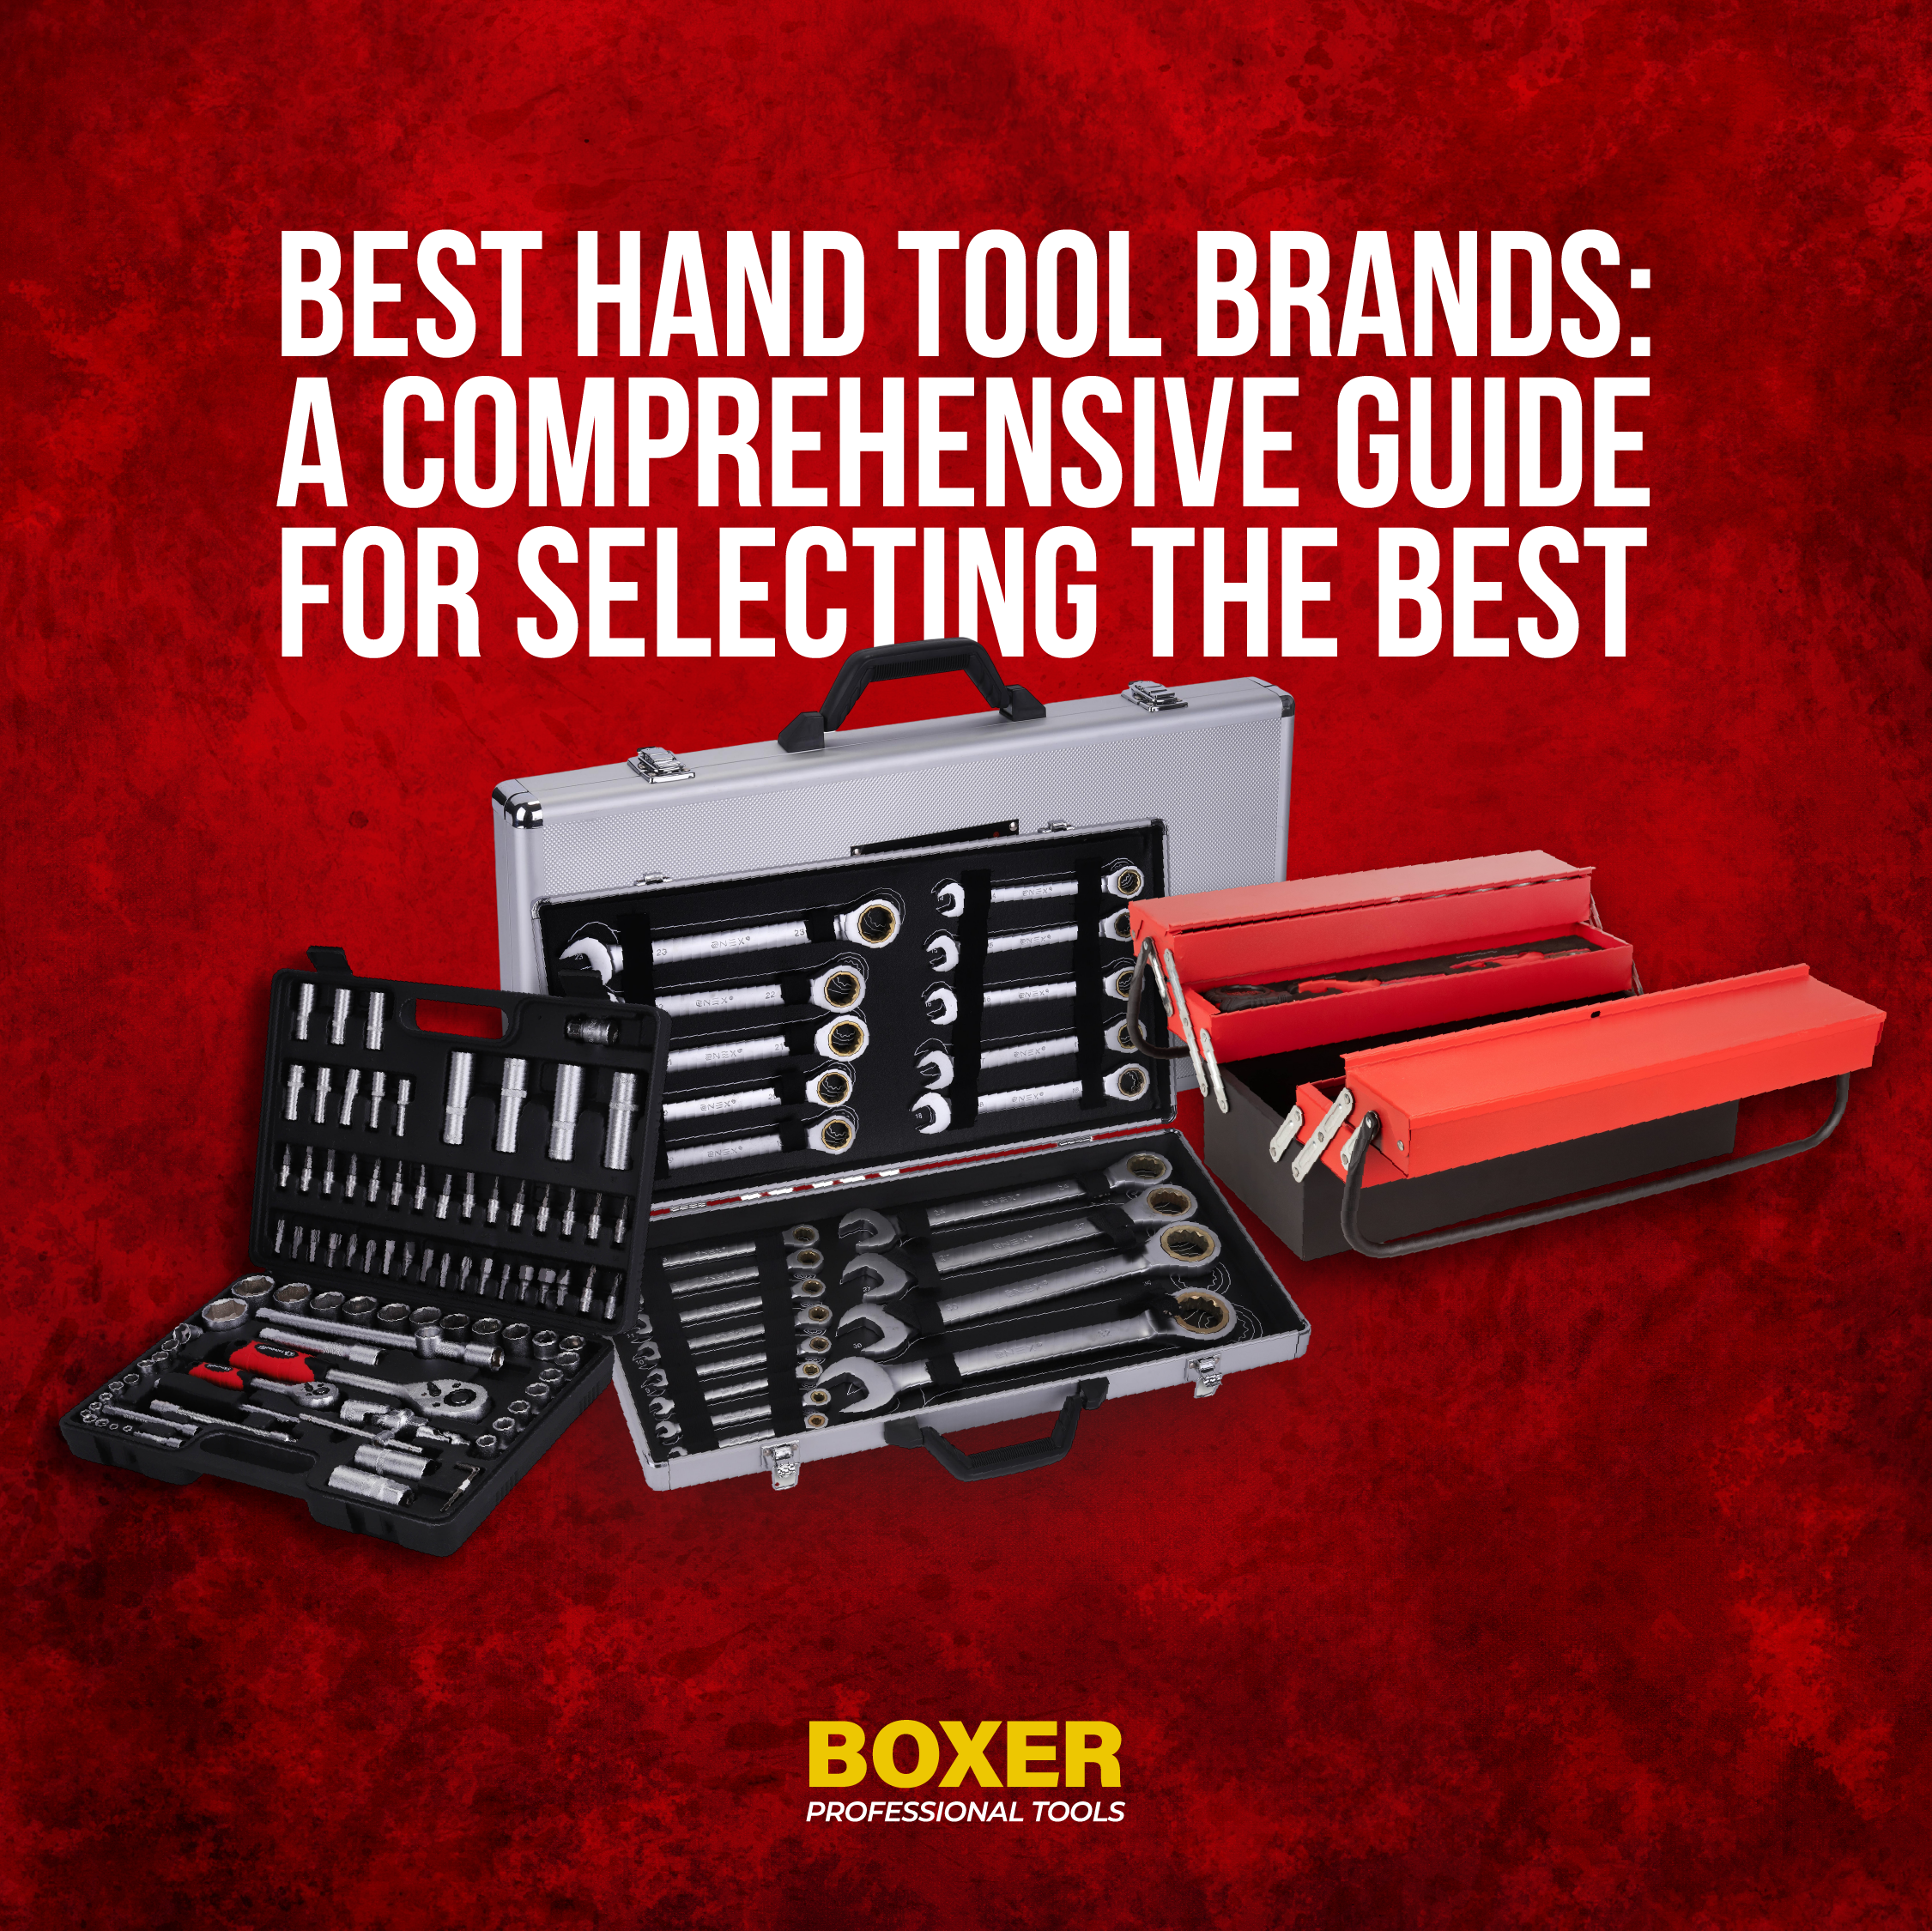 Best Hand Tool Brands: A Comprehensive Guide for Selecting the Best